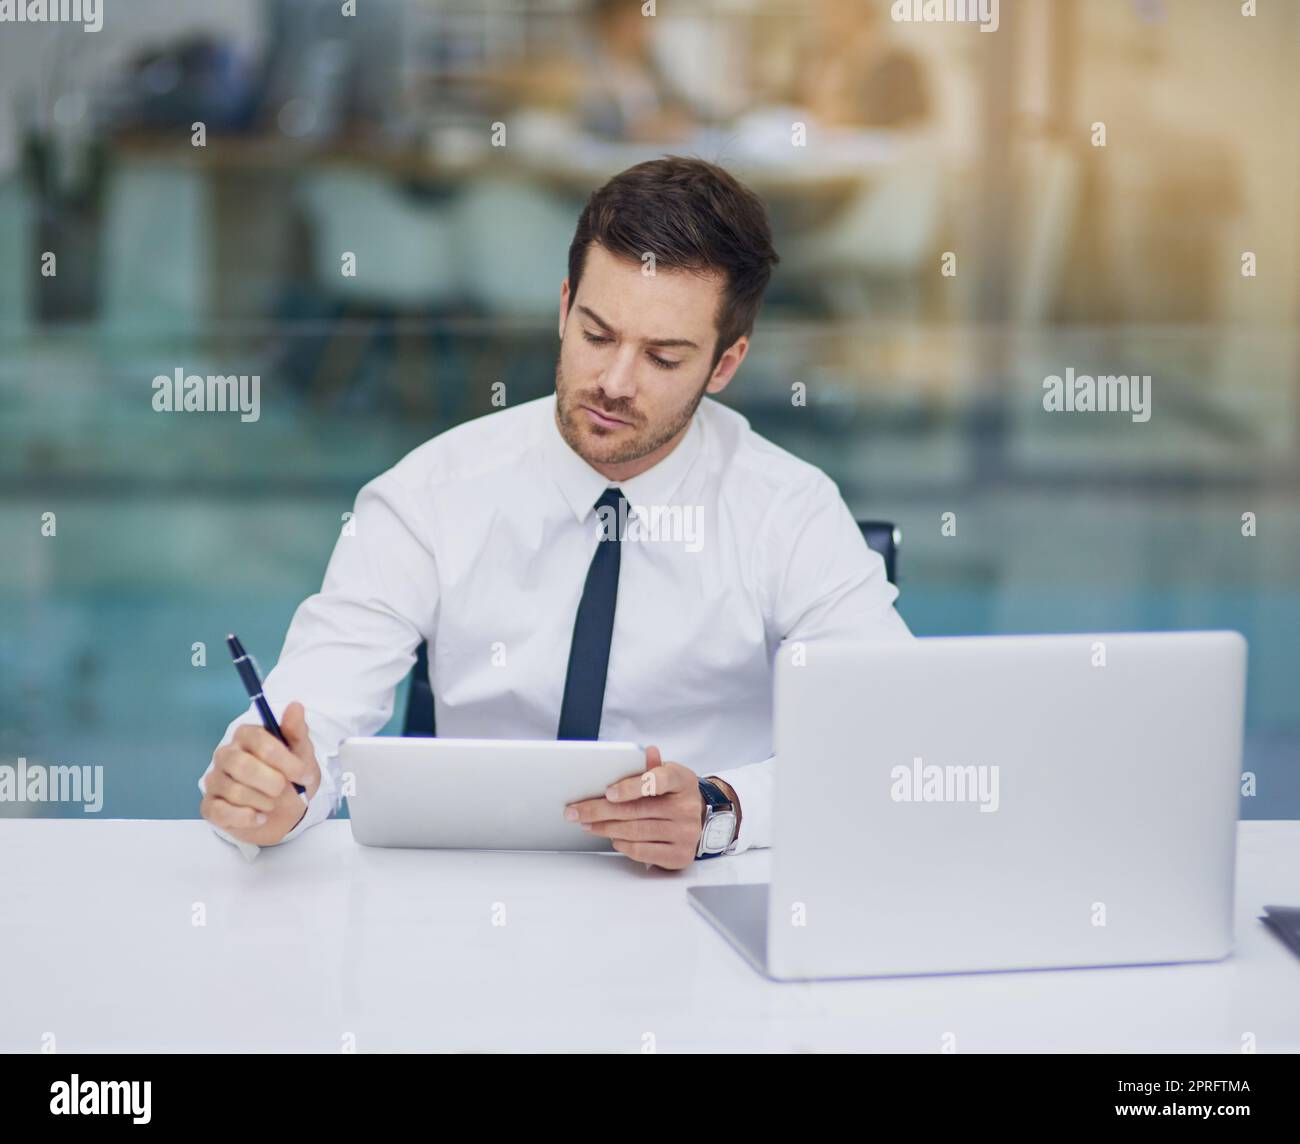 Focused on achieving success. a young businessman working in his office. Stock Photo